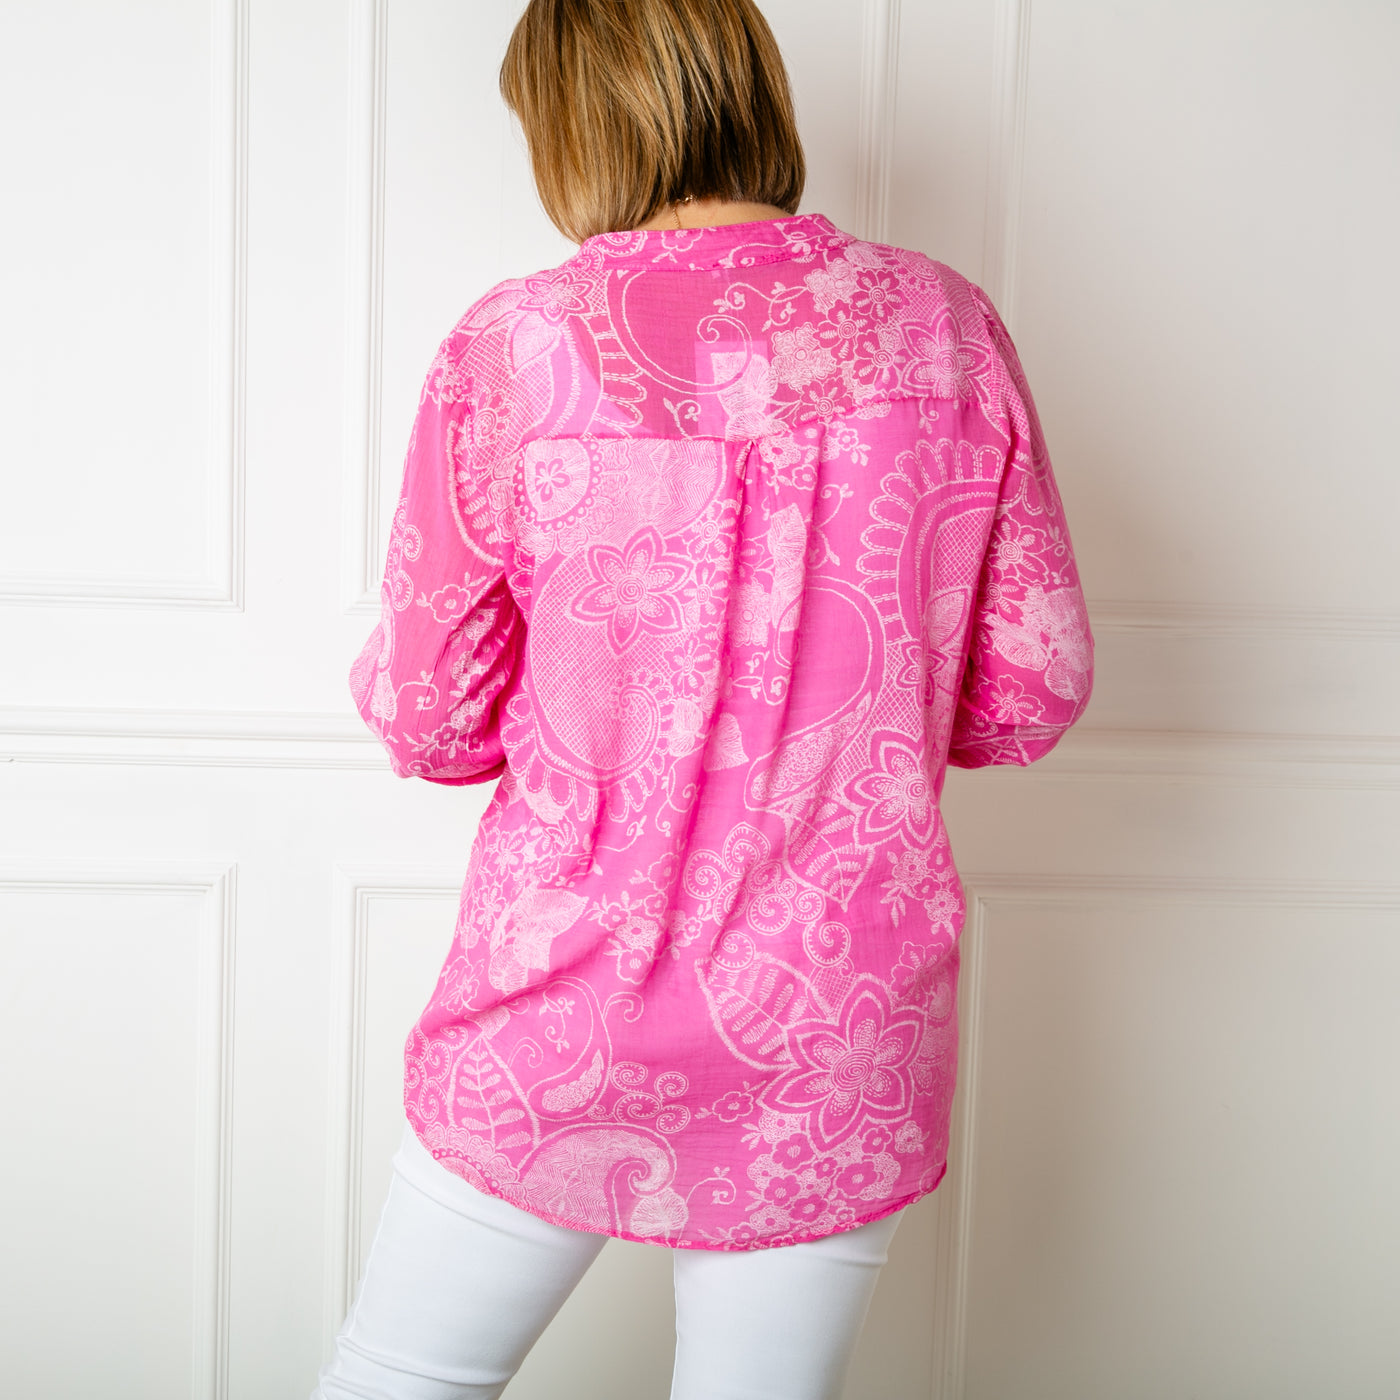 The pink Botanical Cotton Blouse with a collarless v neckline and buttons down to the bust